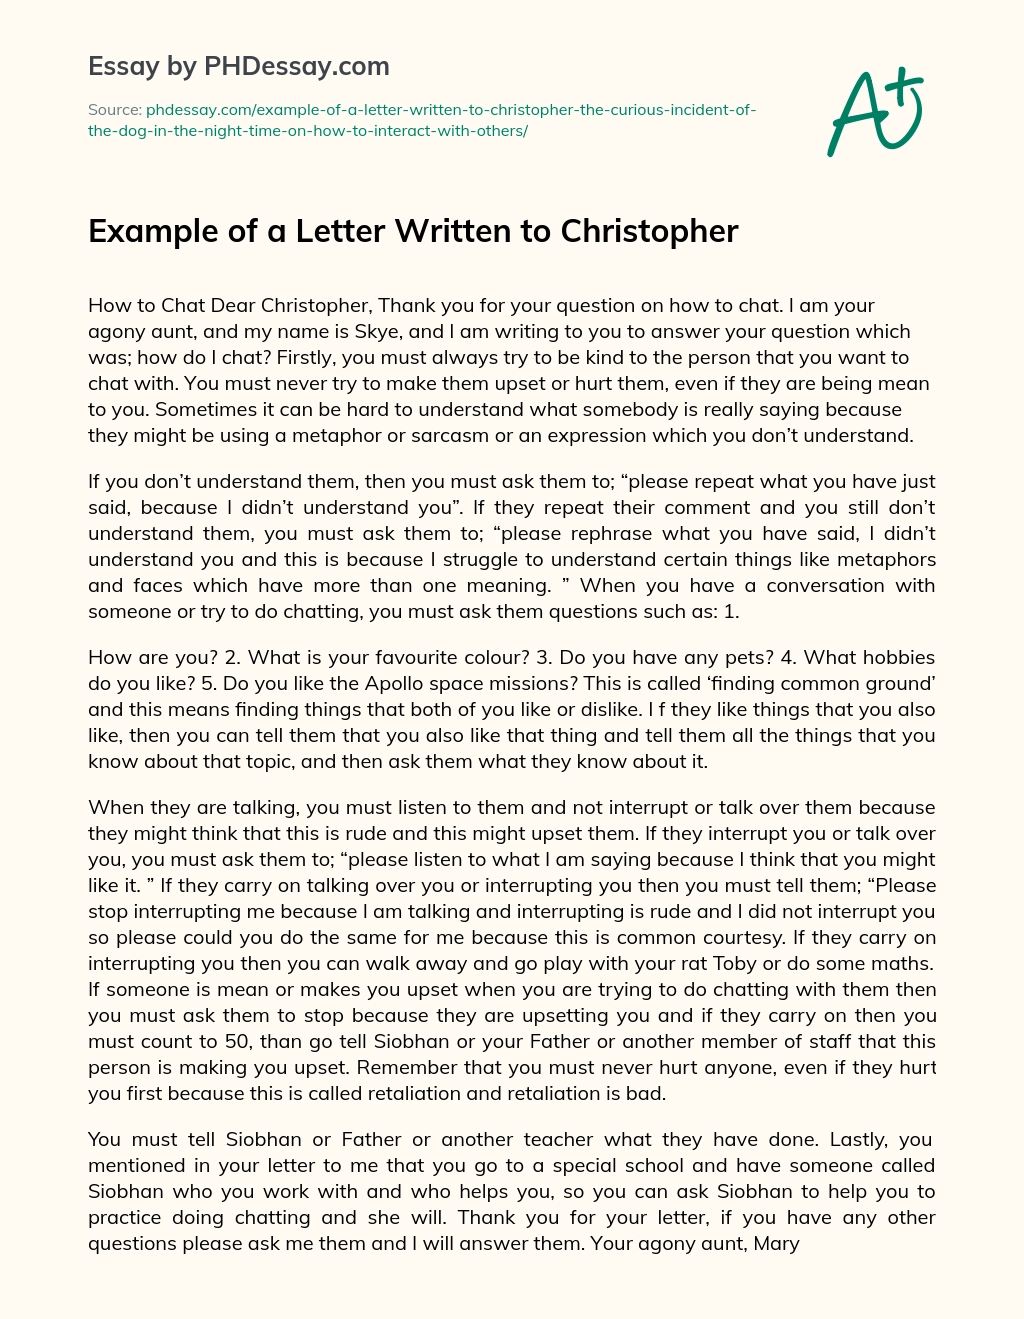 Example of a Letter Written to Christopher essay